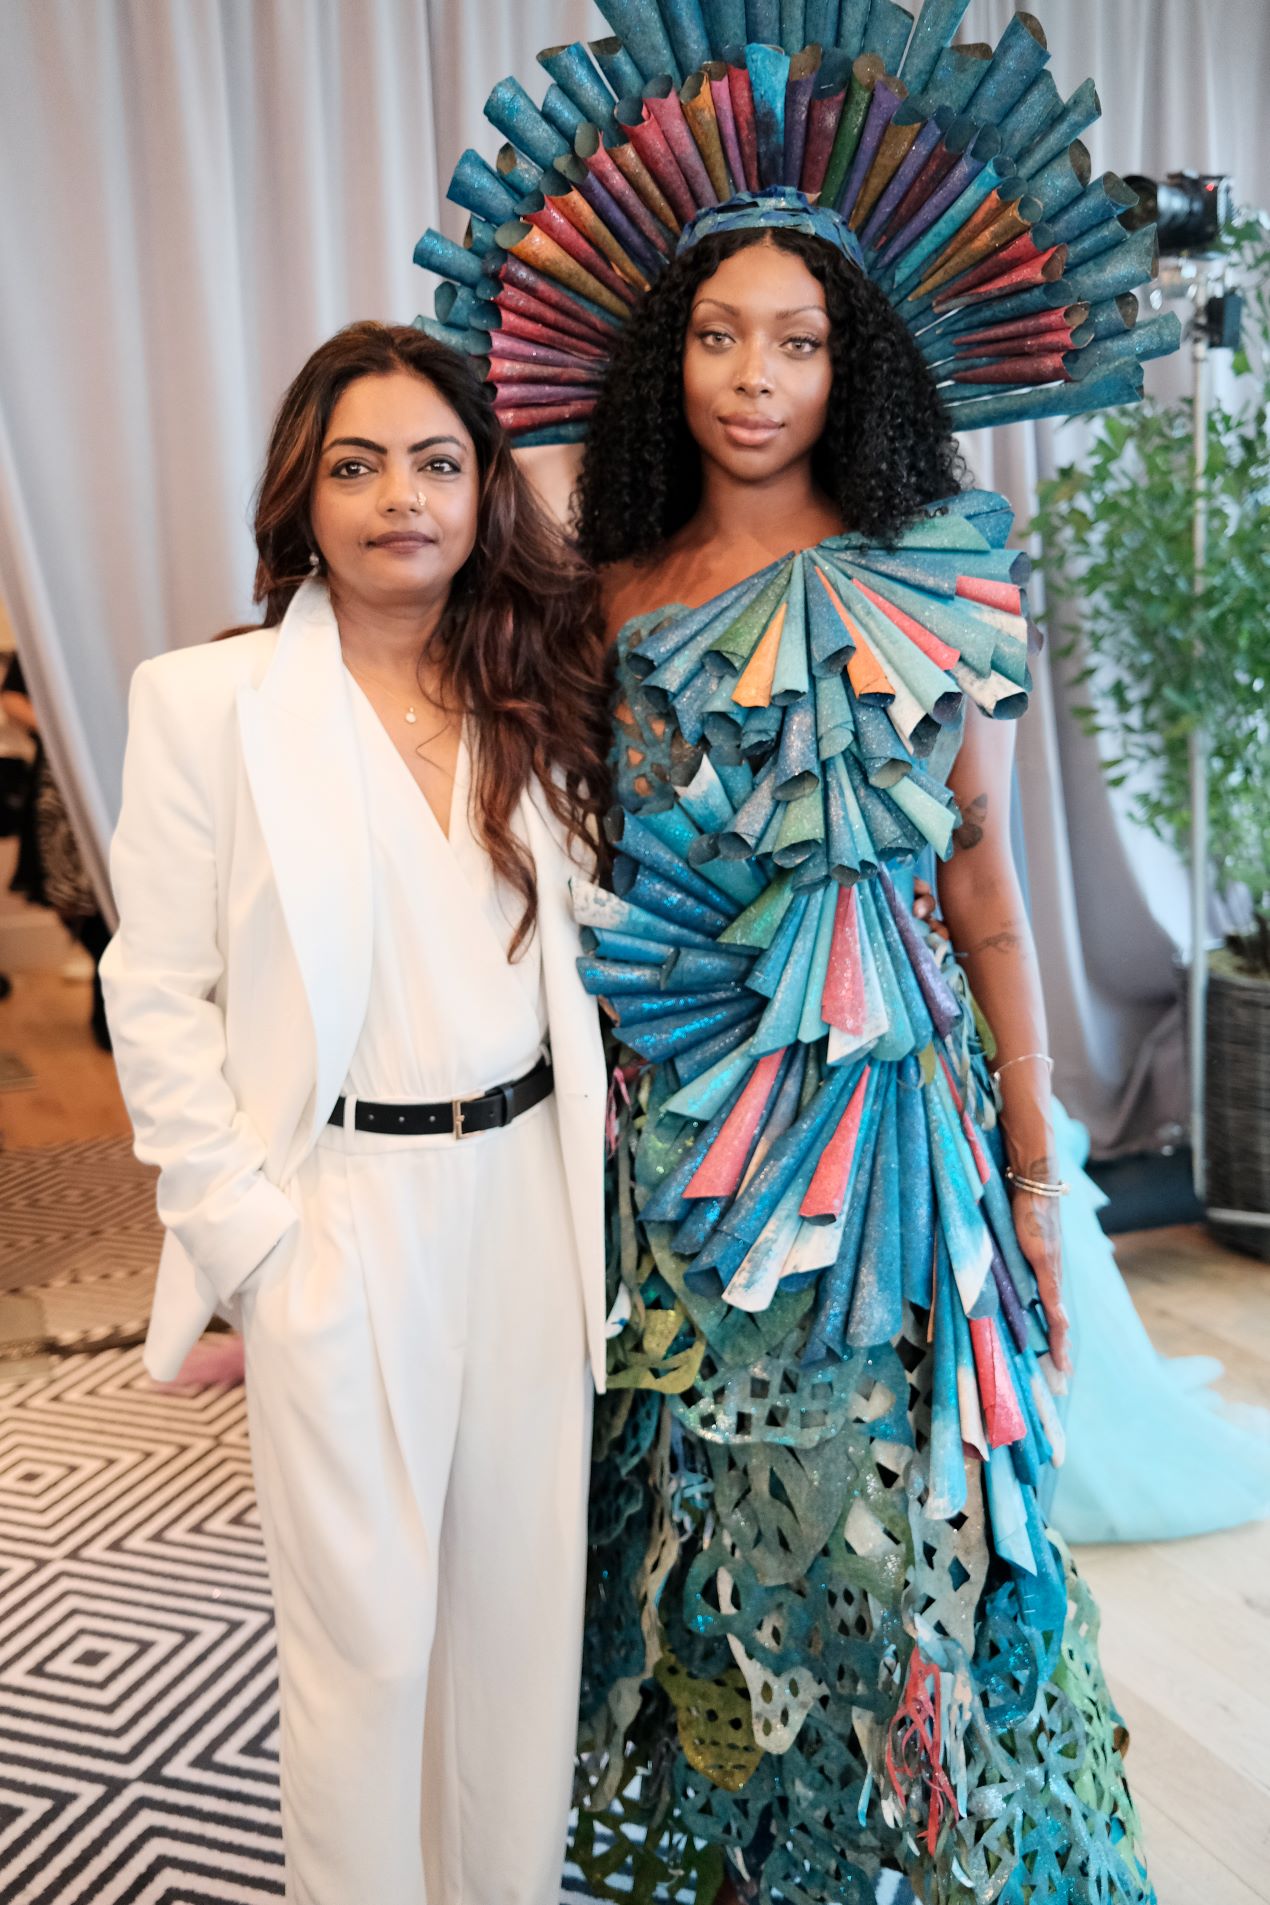 An image of sustainable fashion designer Runa Ray and a model.